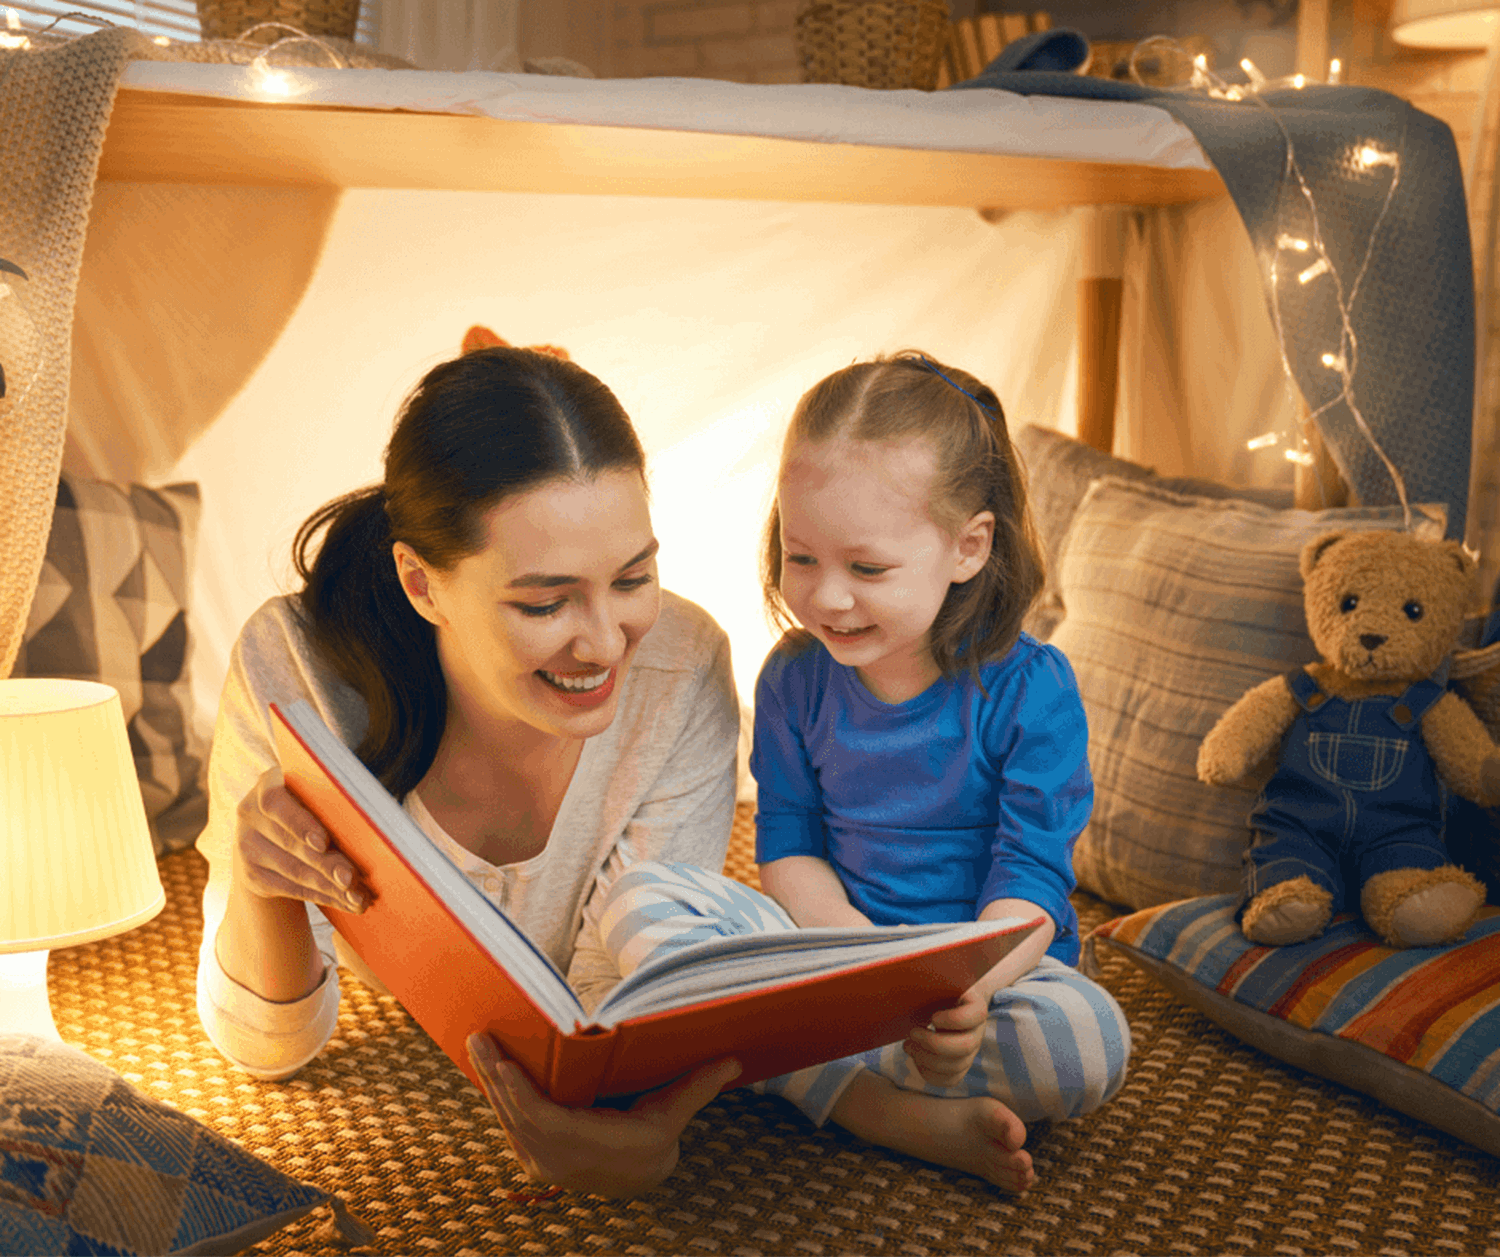 Lady reading to child